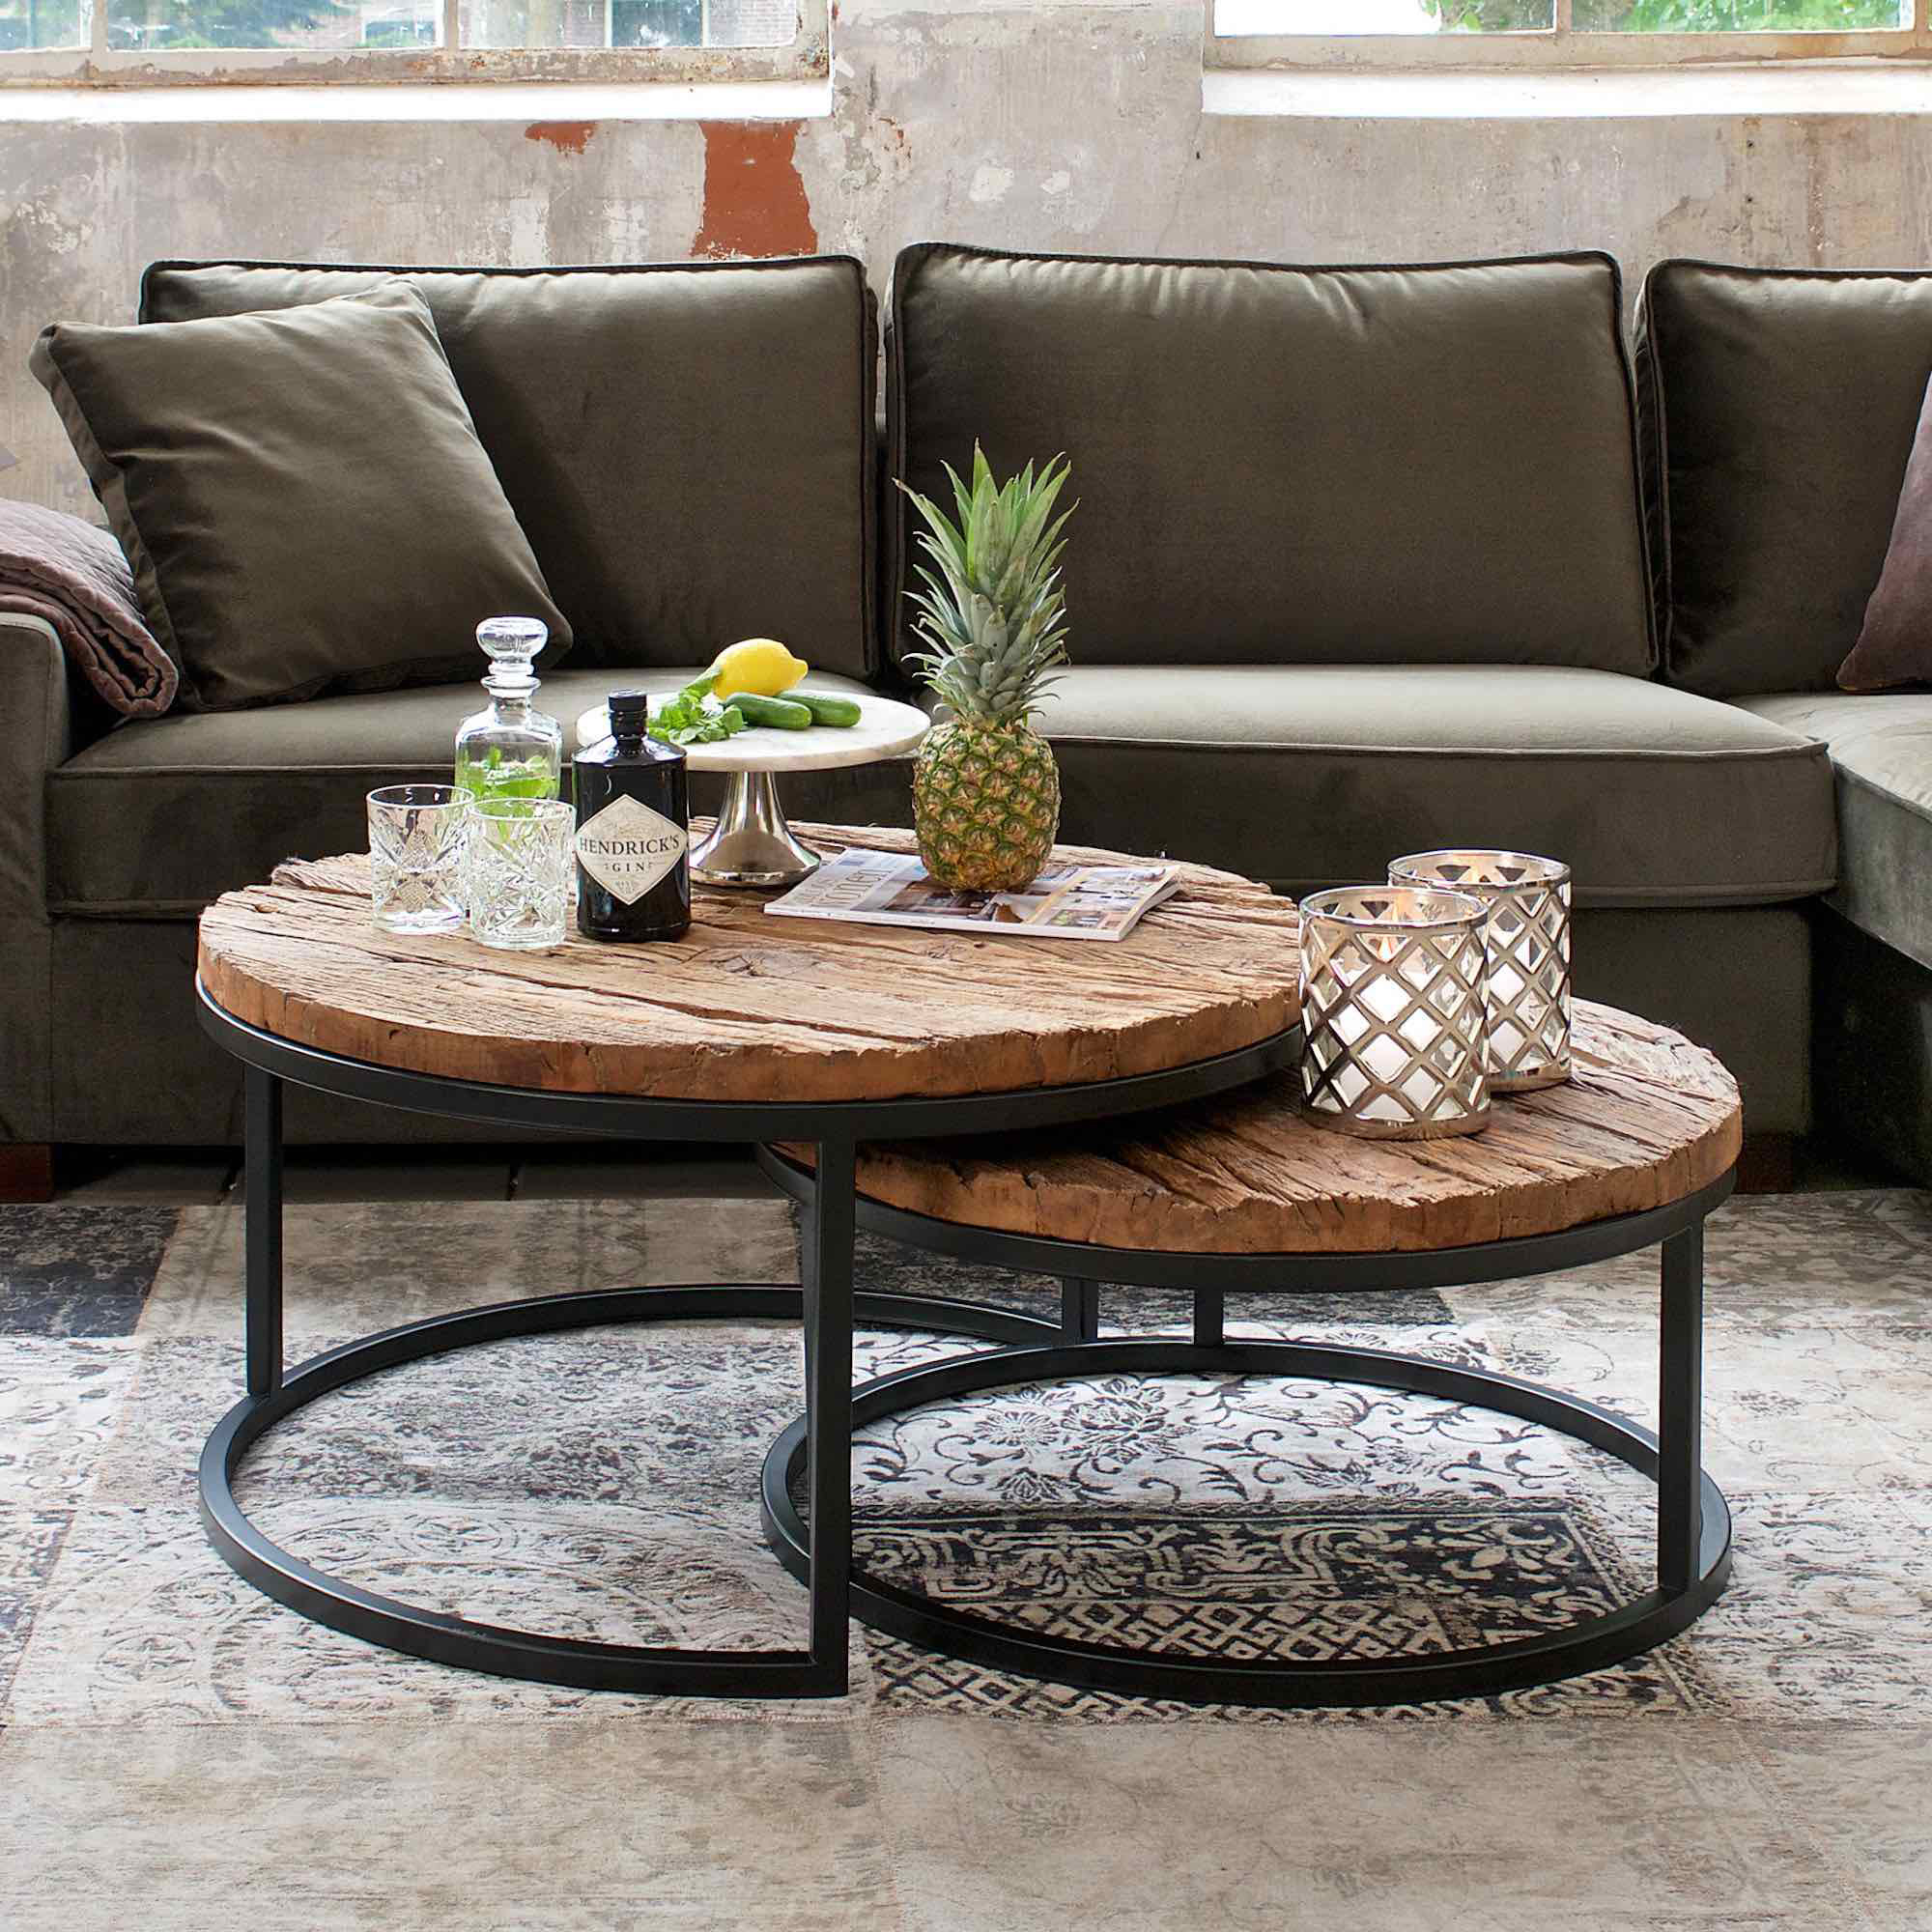 Rustic Recycled Wood Coffee Table Nest - Juliettes Interiors